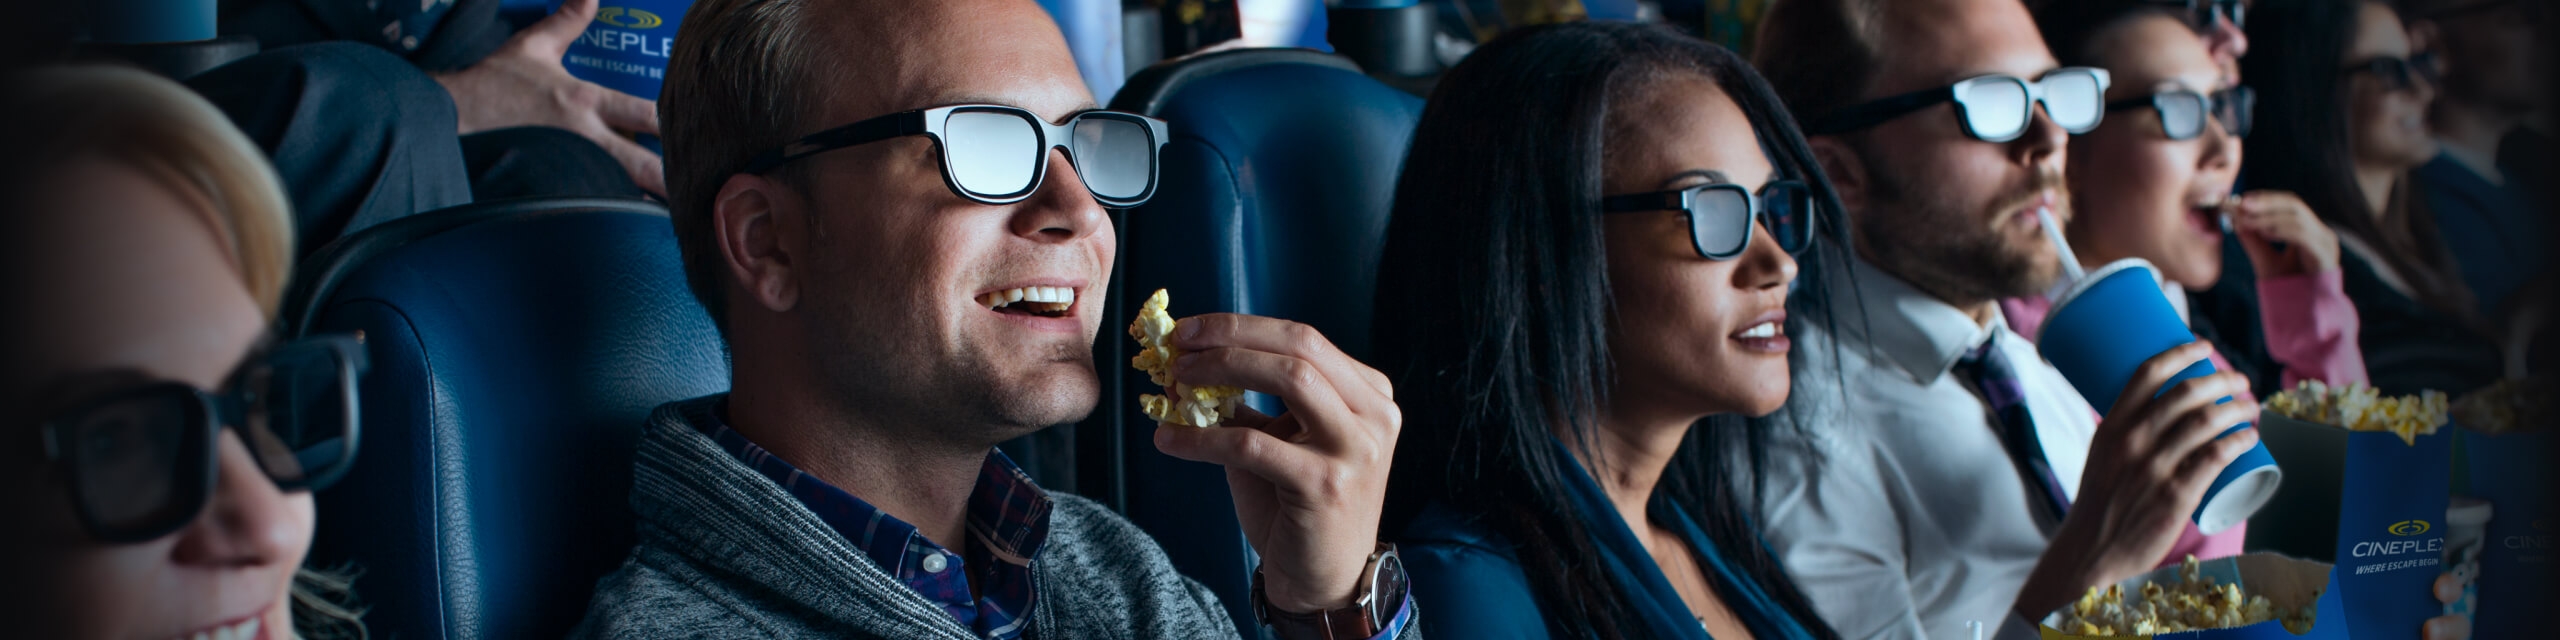 People watching movie in RealD 3D